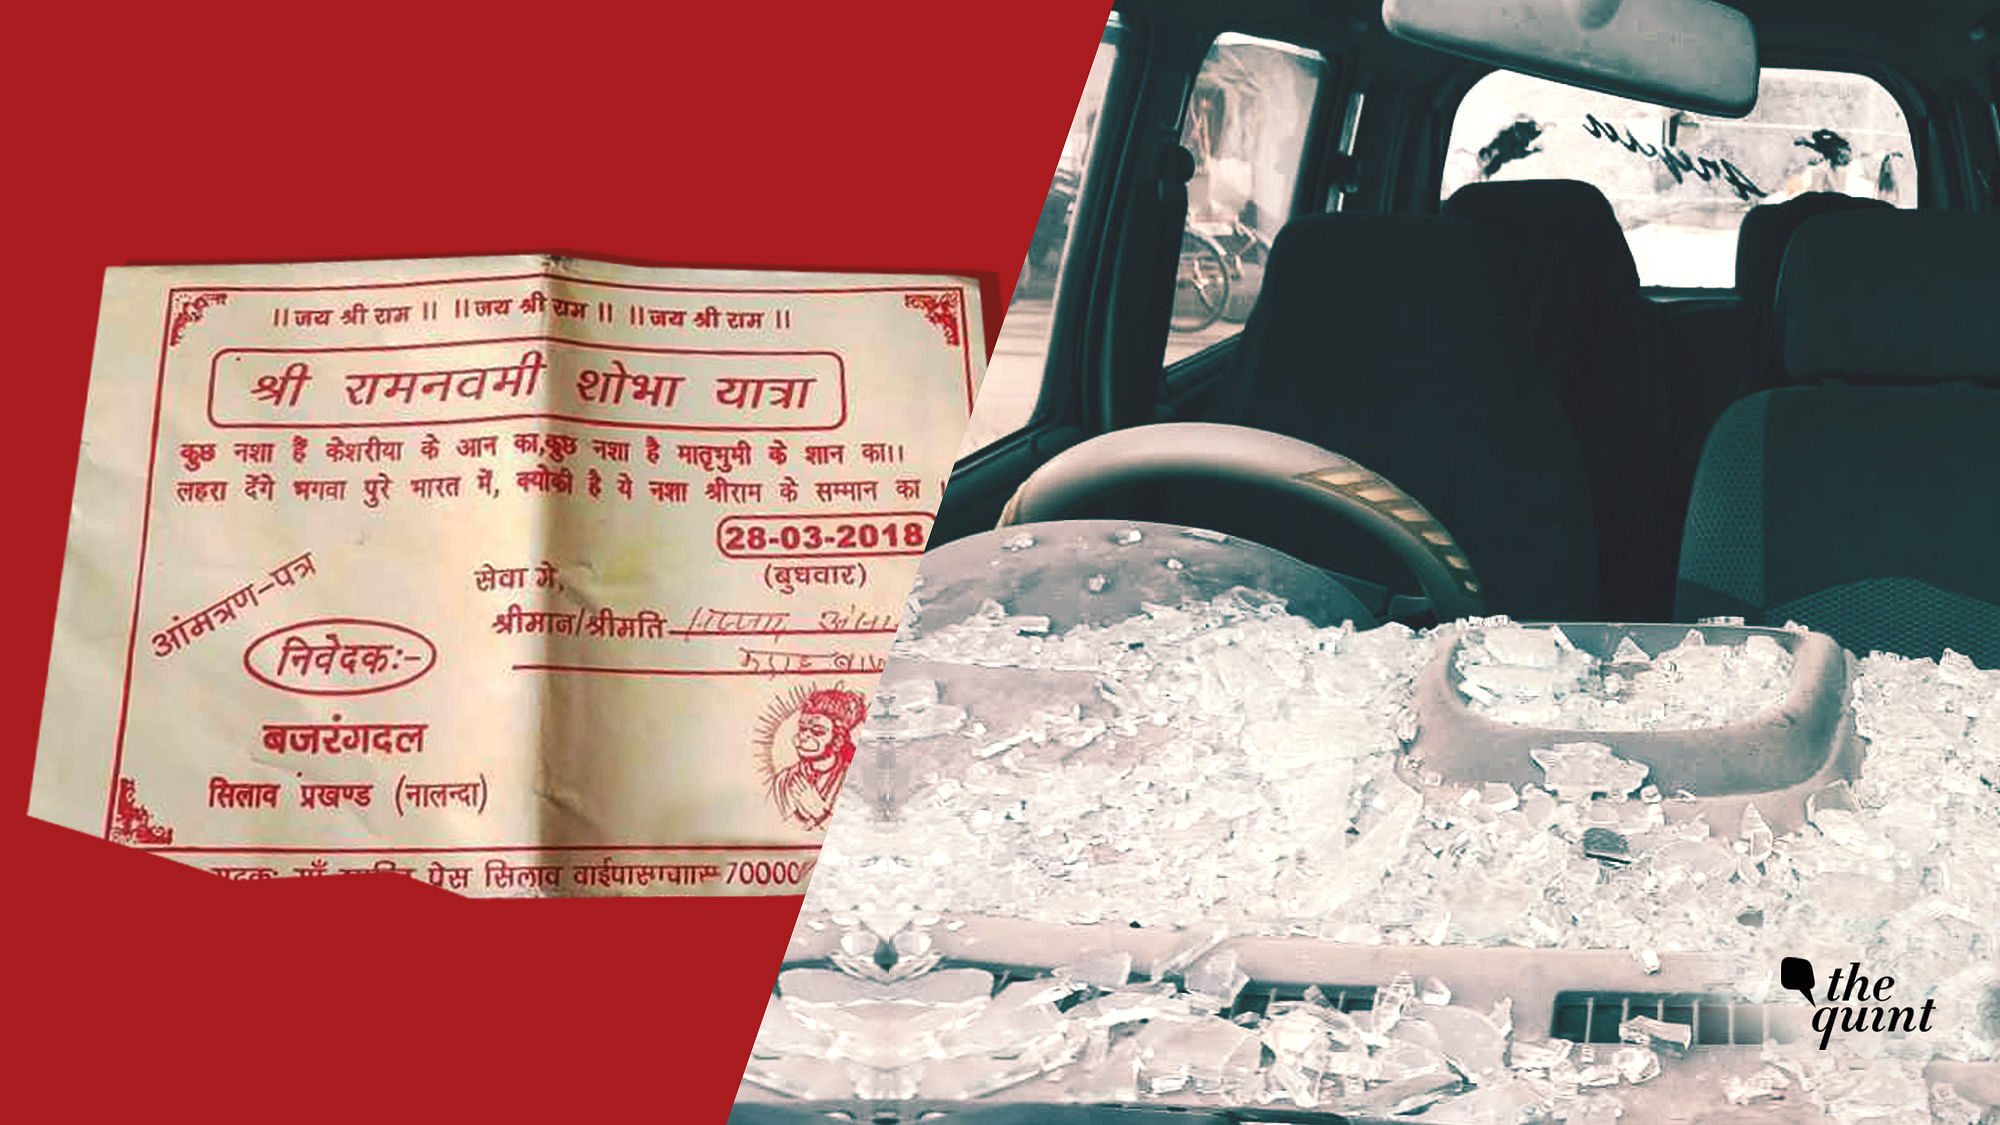 An invite for the Ram Navami procession in Nalanda (L); broken glass of a car that came under attack by the miscreants on Nwadih road in Aurangabad, Bihar (R)